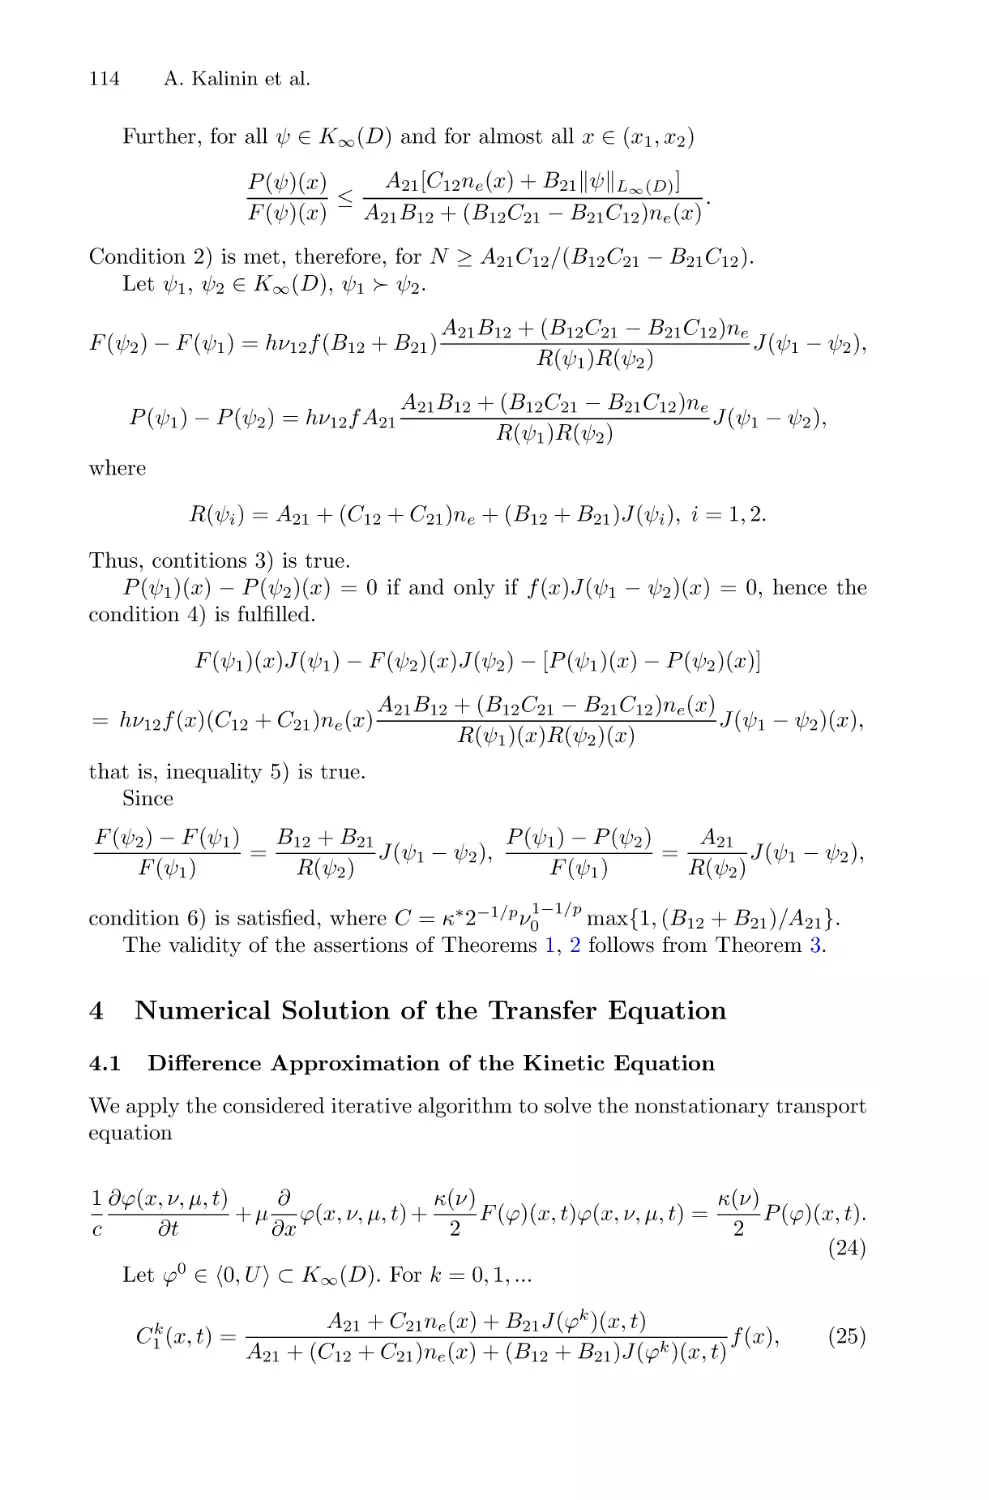 4 Numerical Solution of the Transfer Equation
4.1 Difference Approximation of the Kinetic Equation